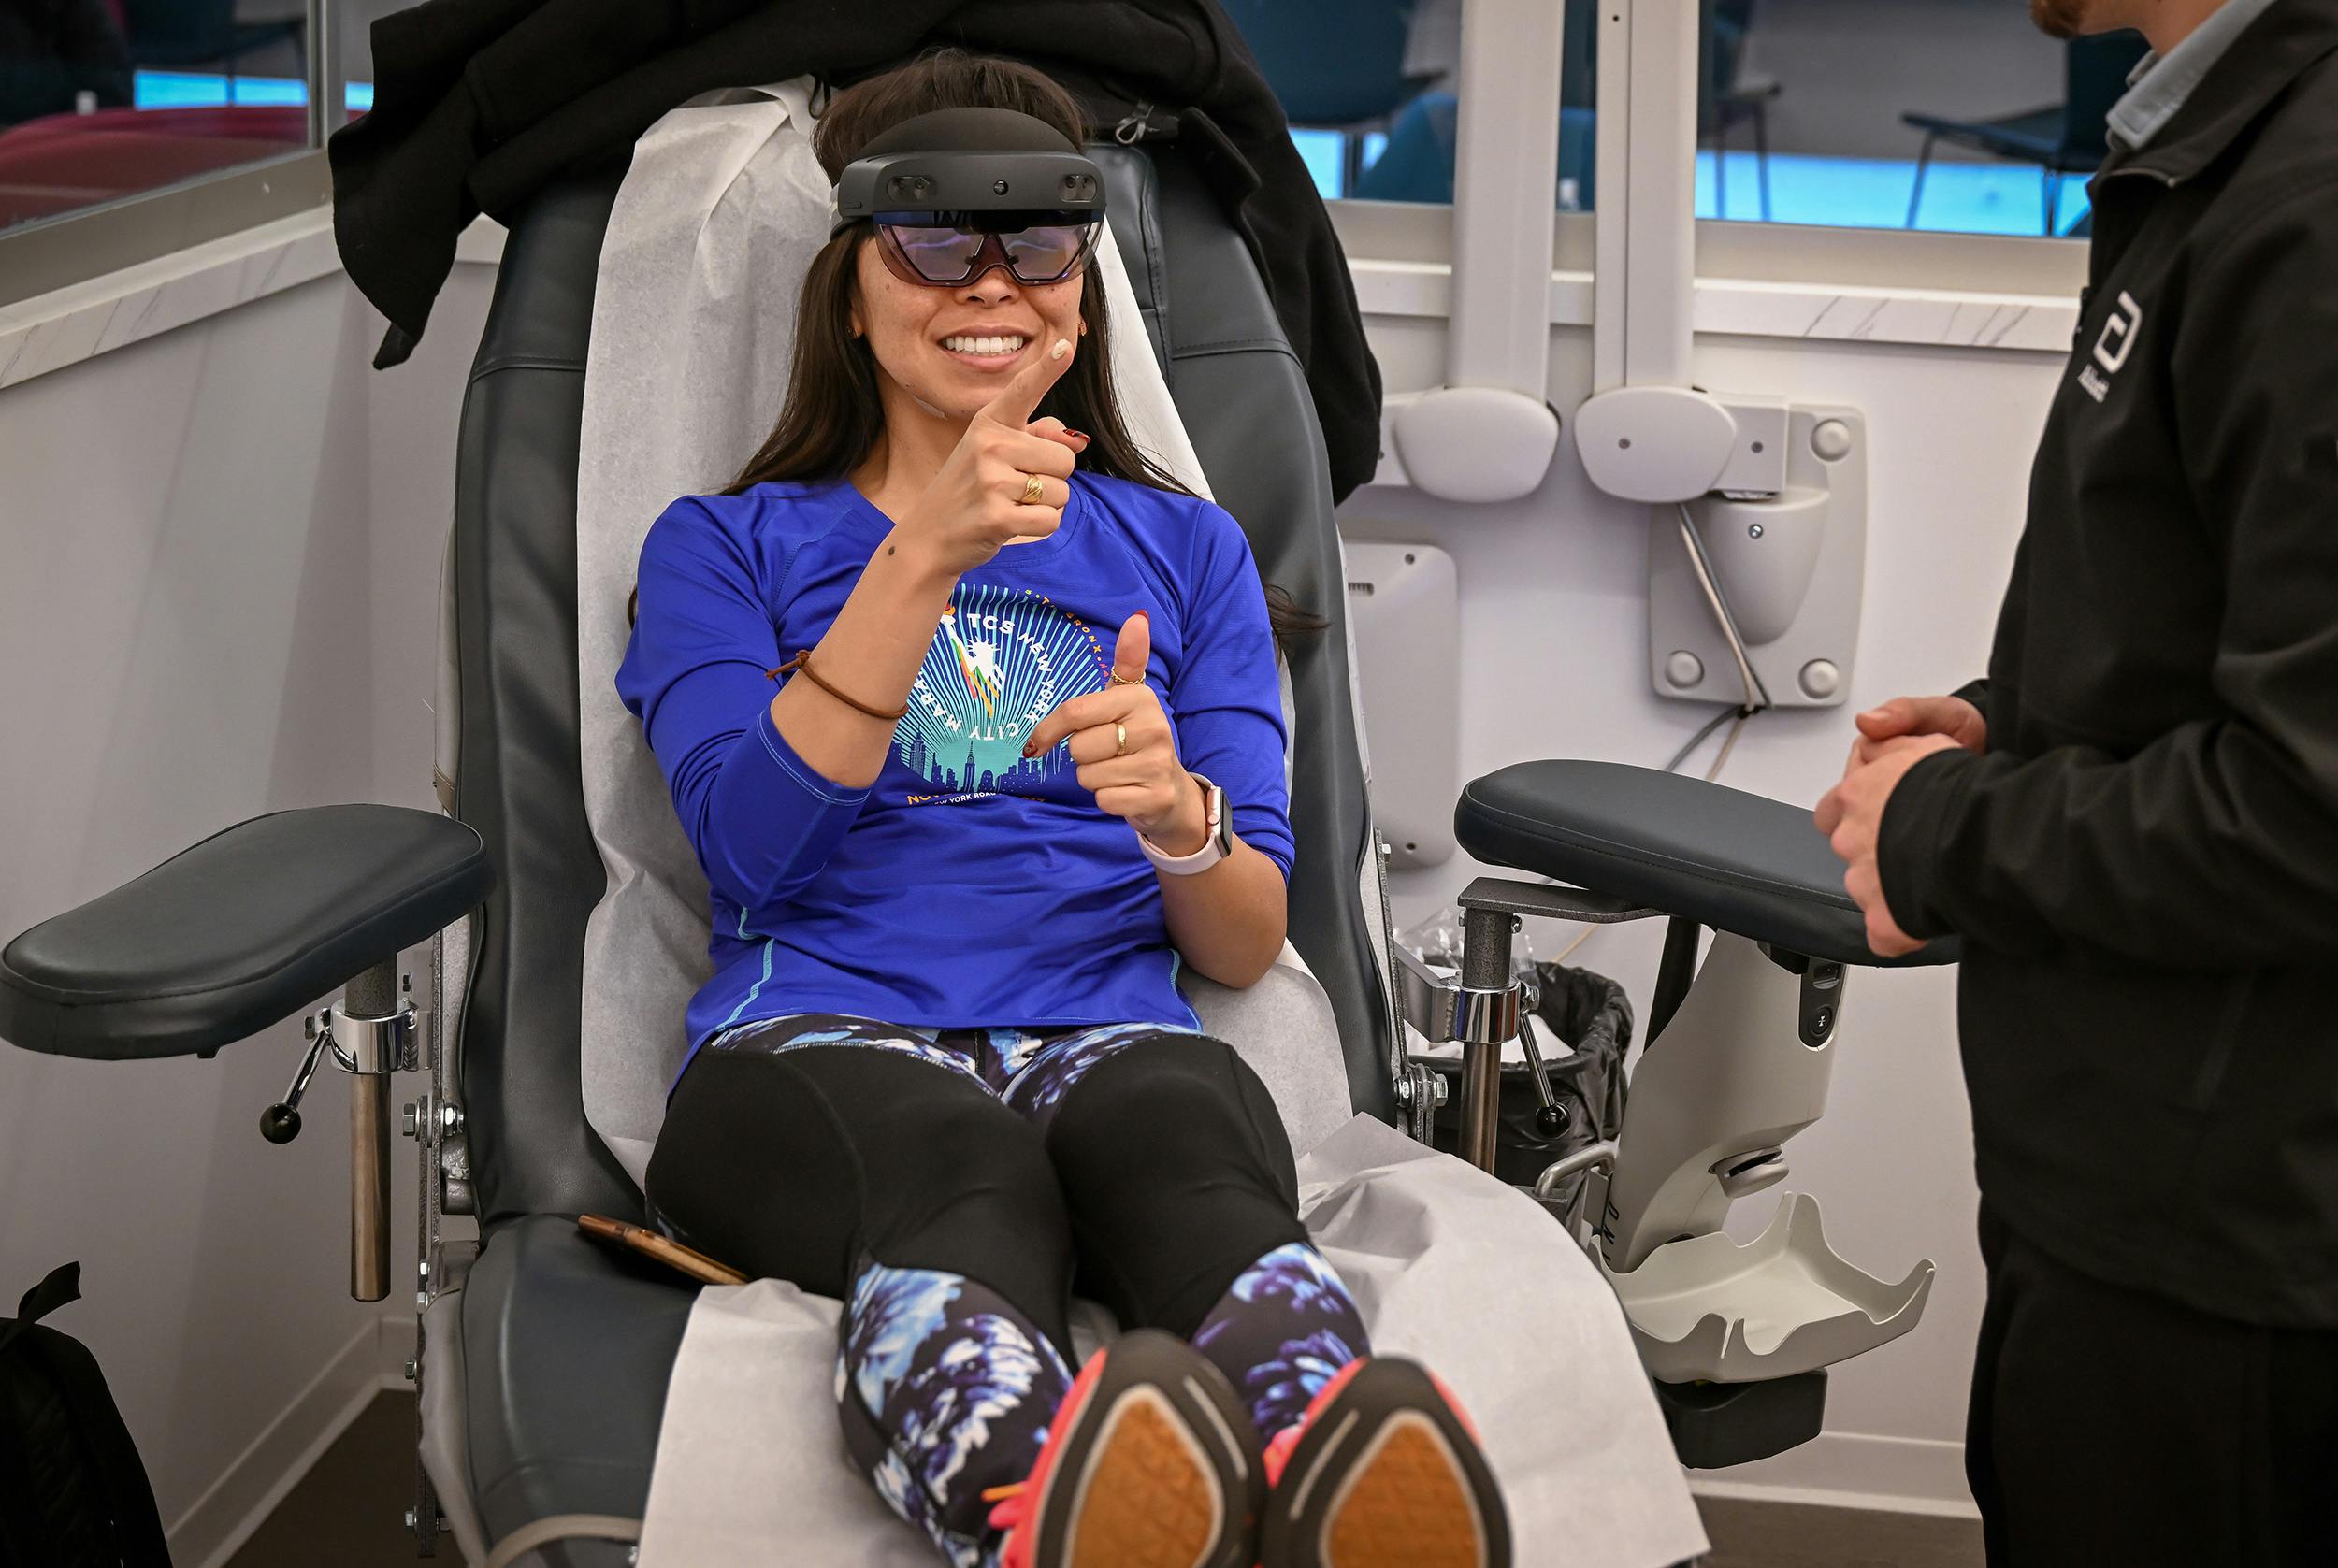 A woman preparing to donate blood while wearing the mixed-reality headset.